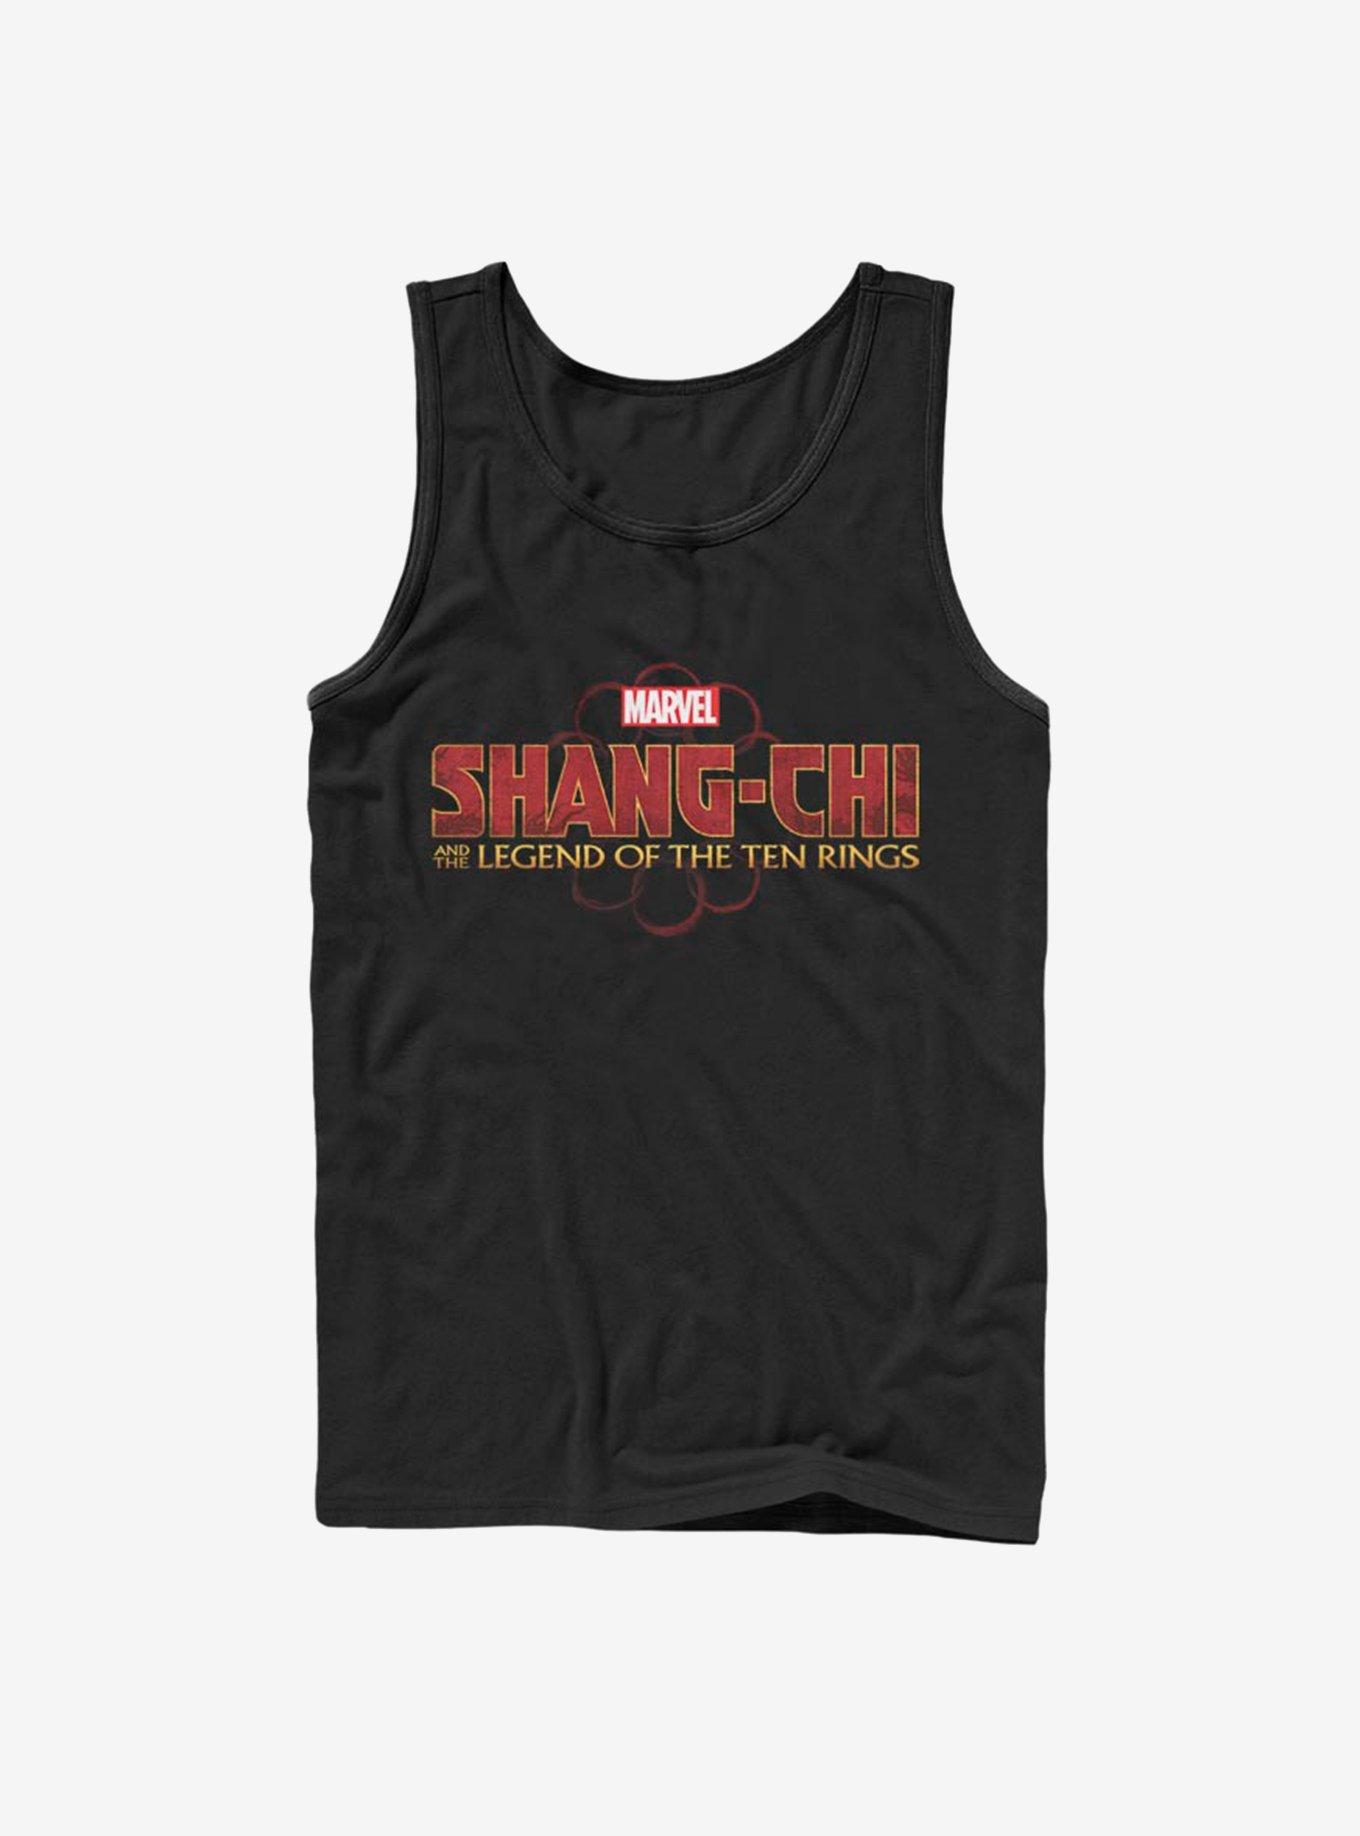 Marvel Shang-Chi And The Legend Of The Ten Rings Tank, BLACK, hi-res